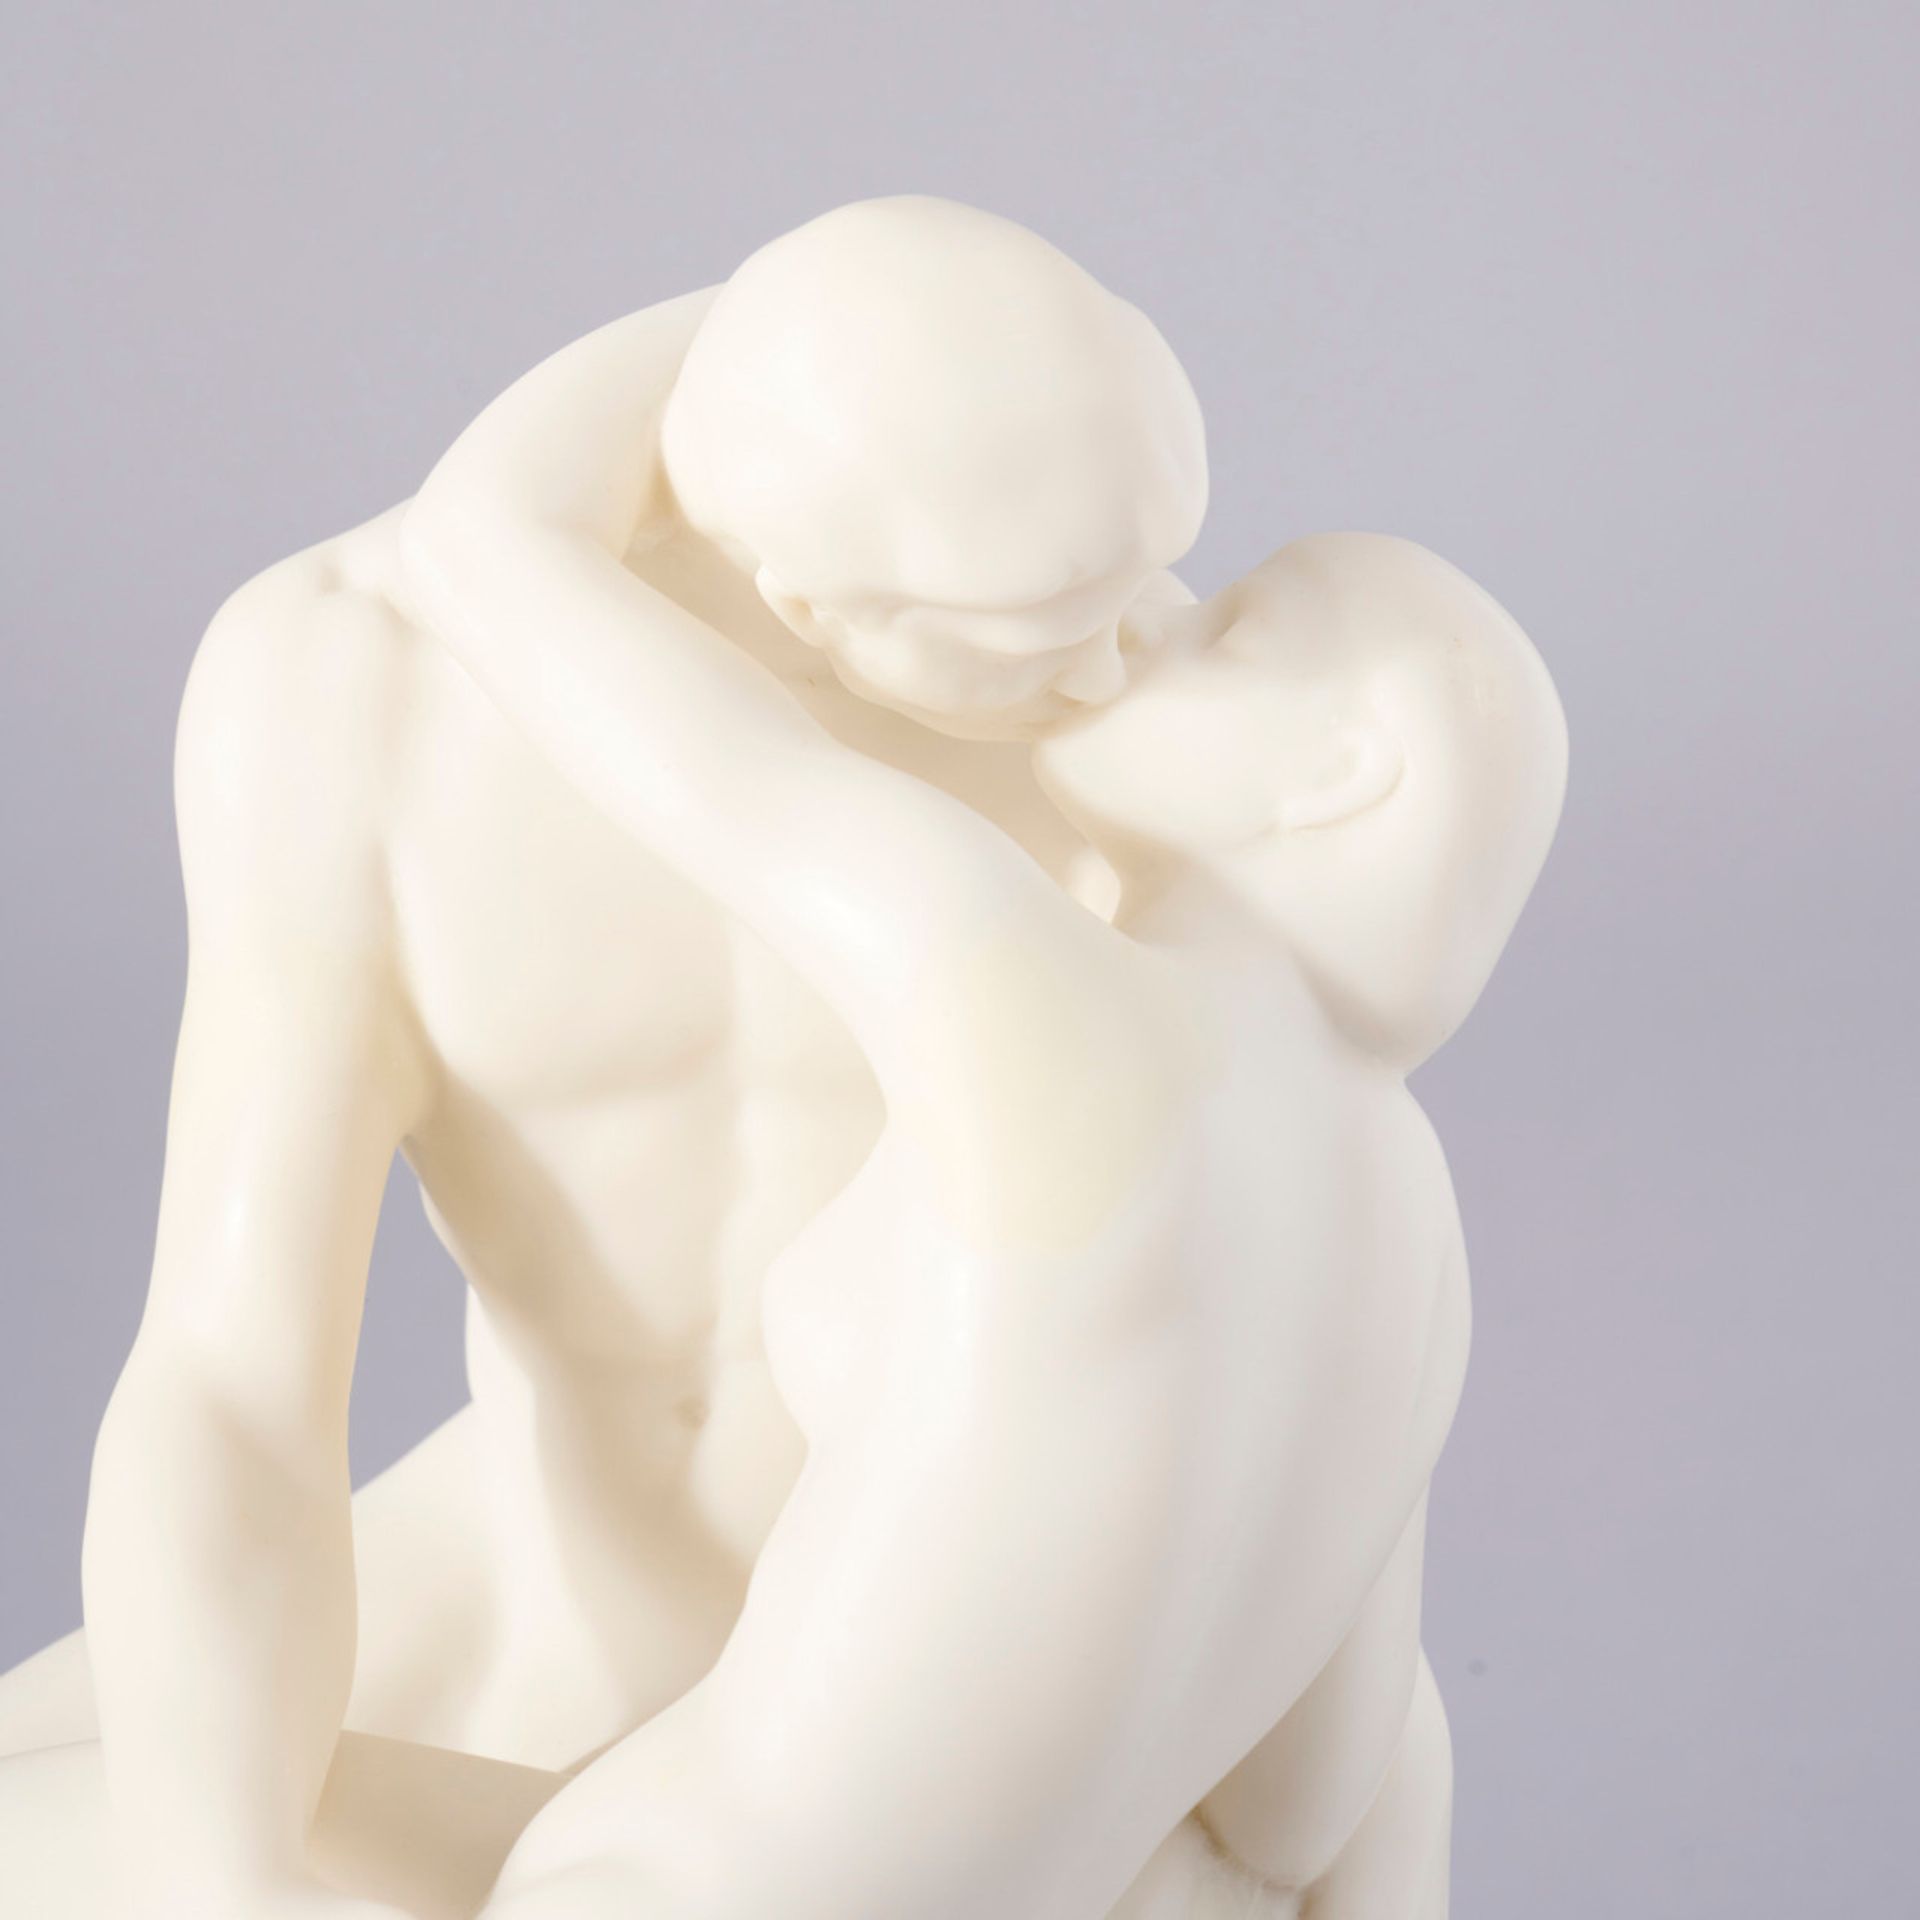 Auguste Rodin "The Kiss" Sculpture - Image 2 of 4